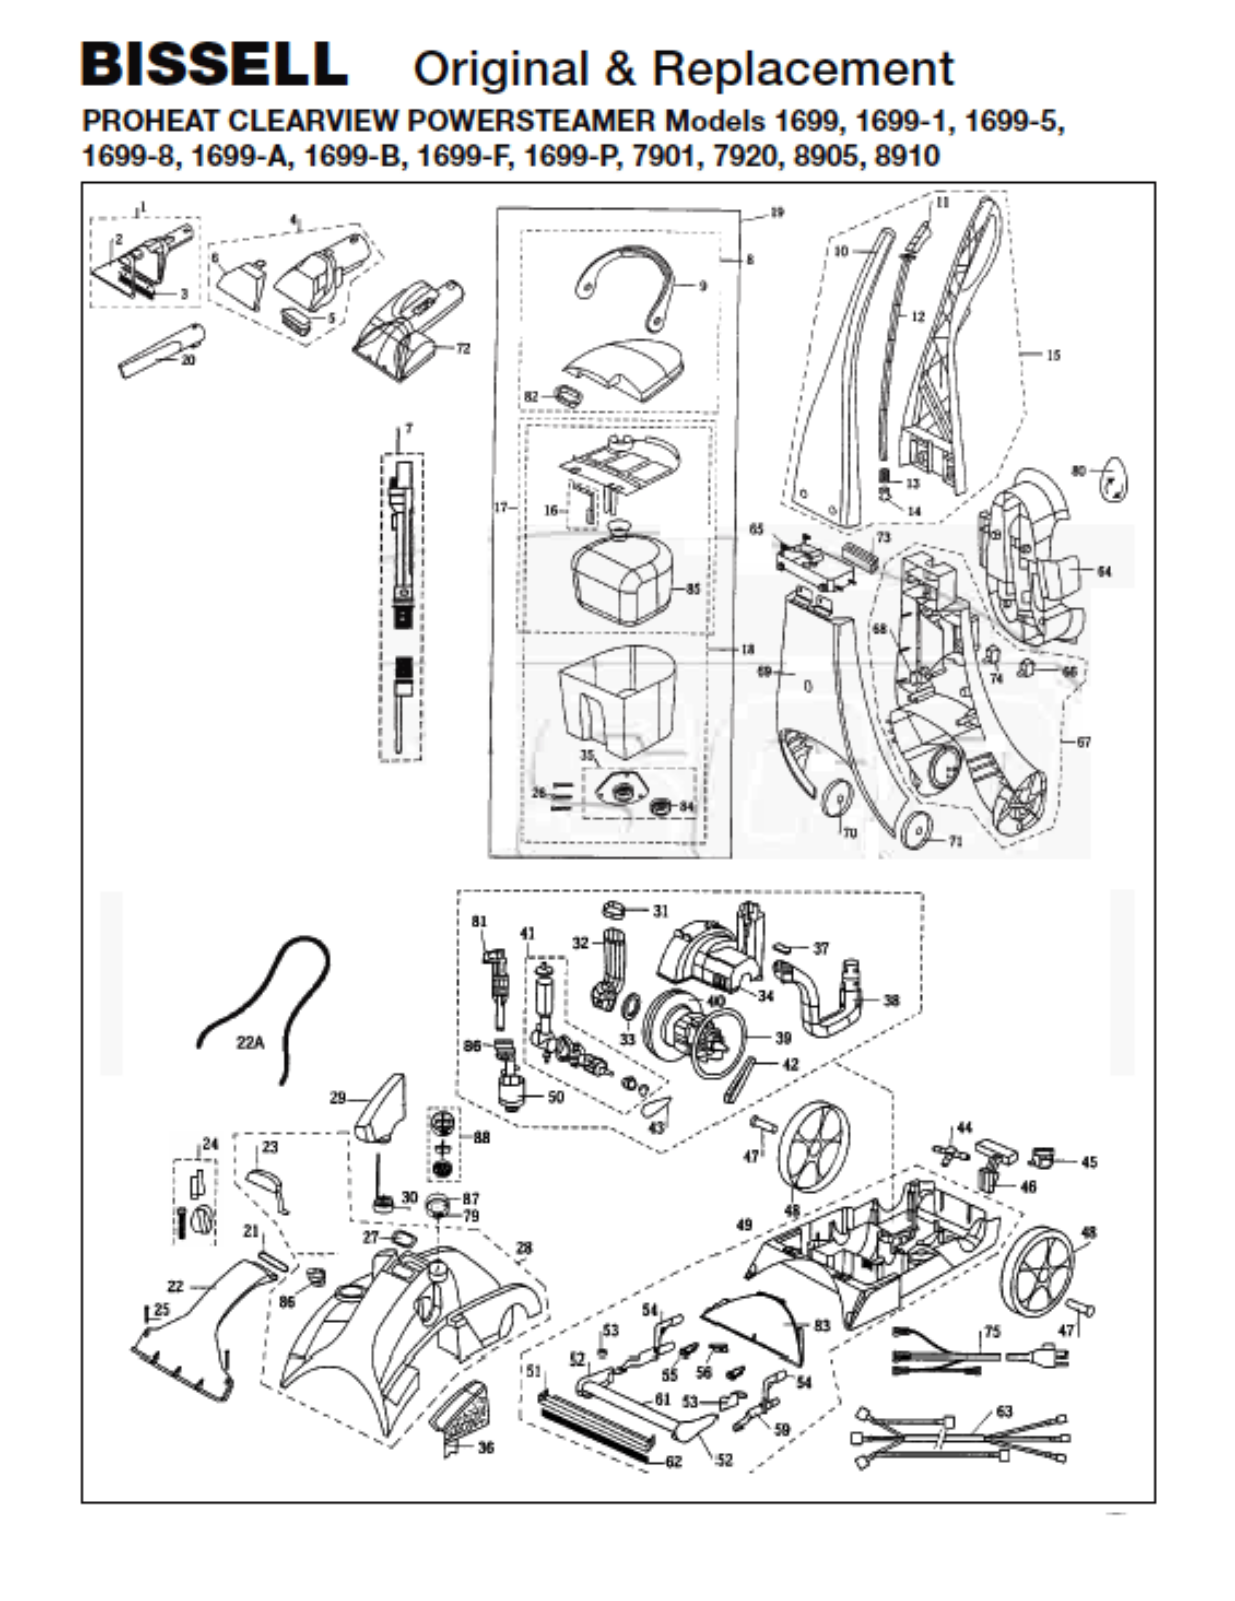 Bissell 1669-1, 1699-8, 1699-a, 1699-b, 1699-f Owner's Manual